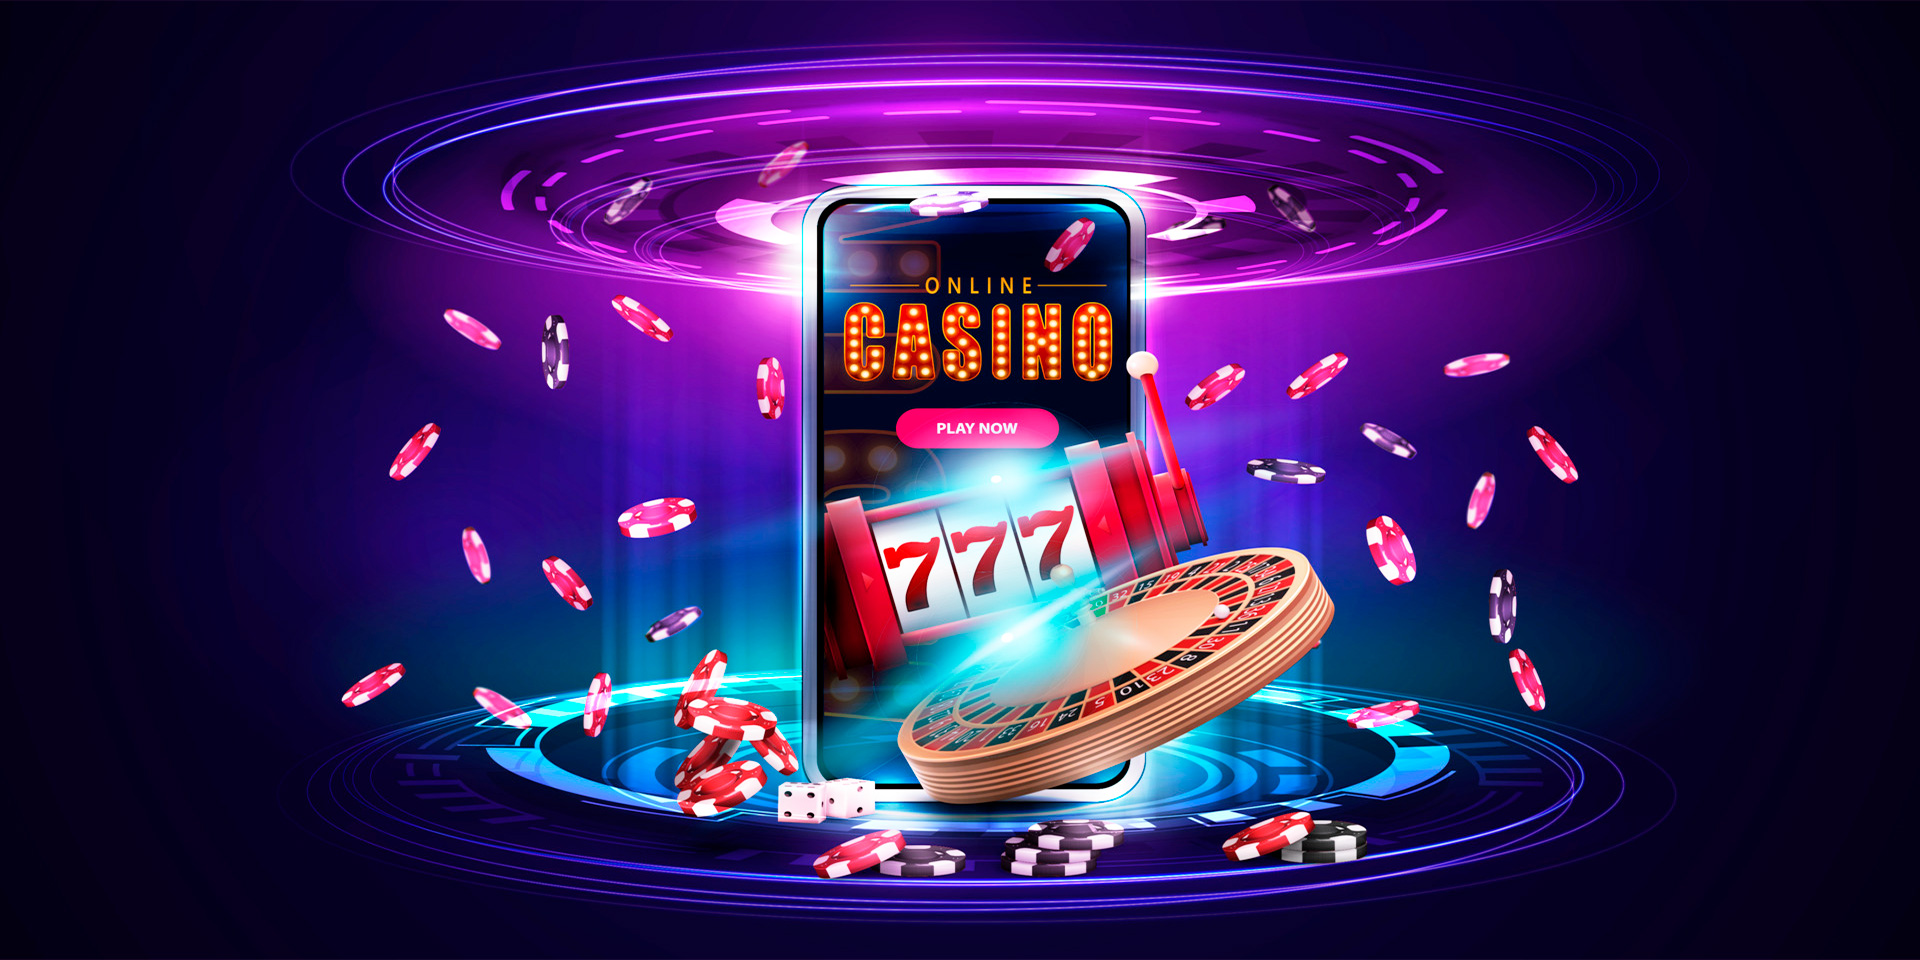 Online casino commissions